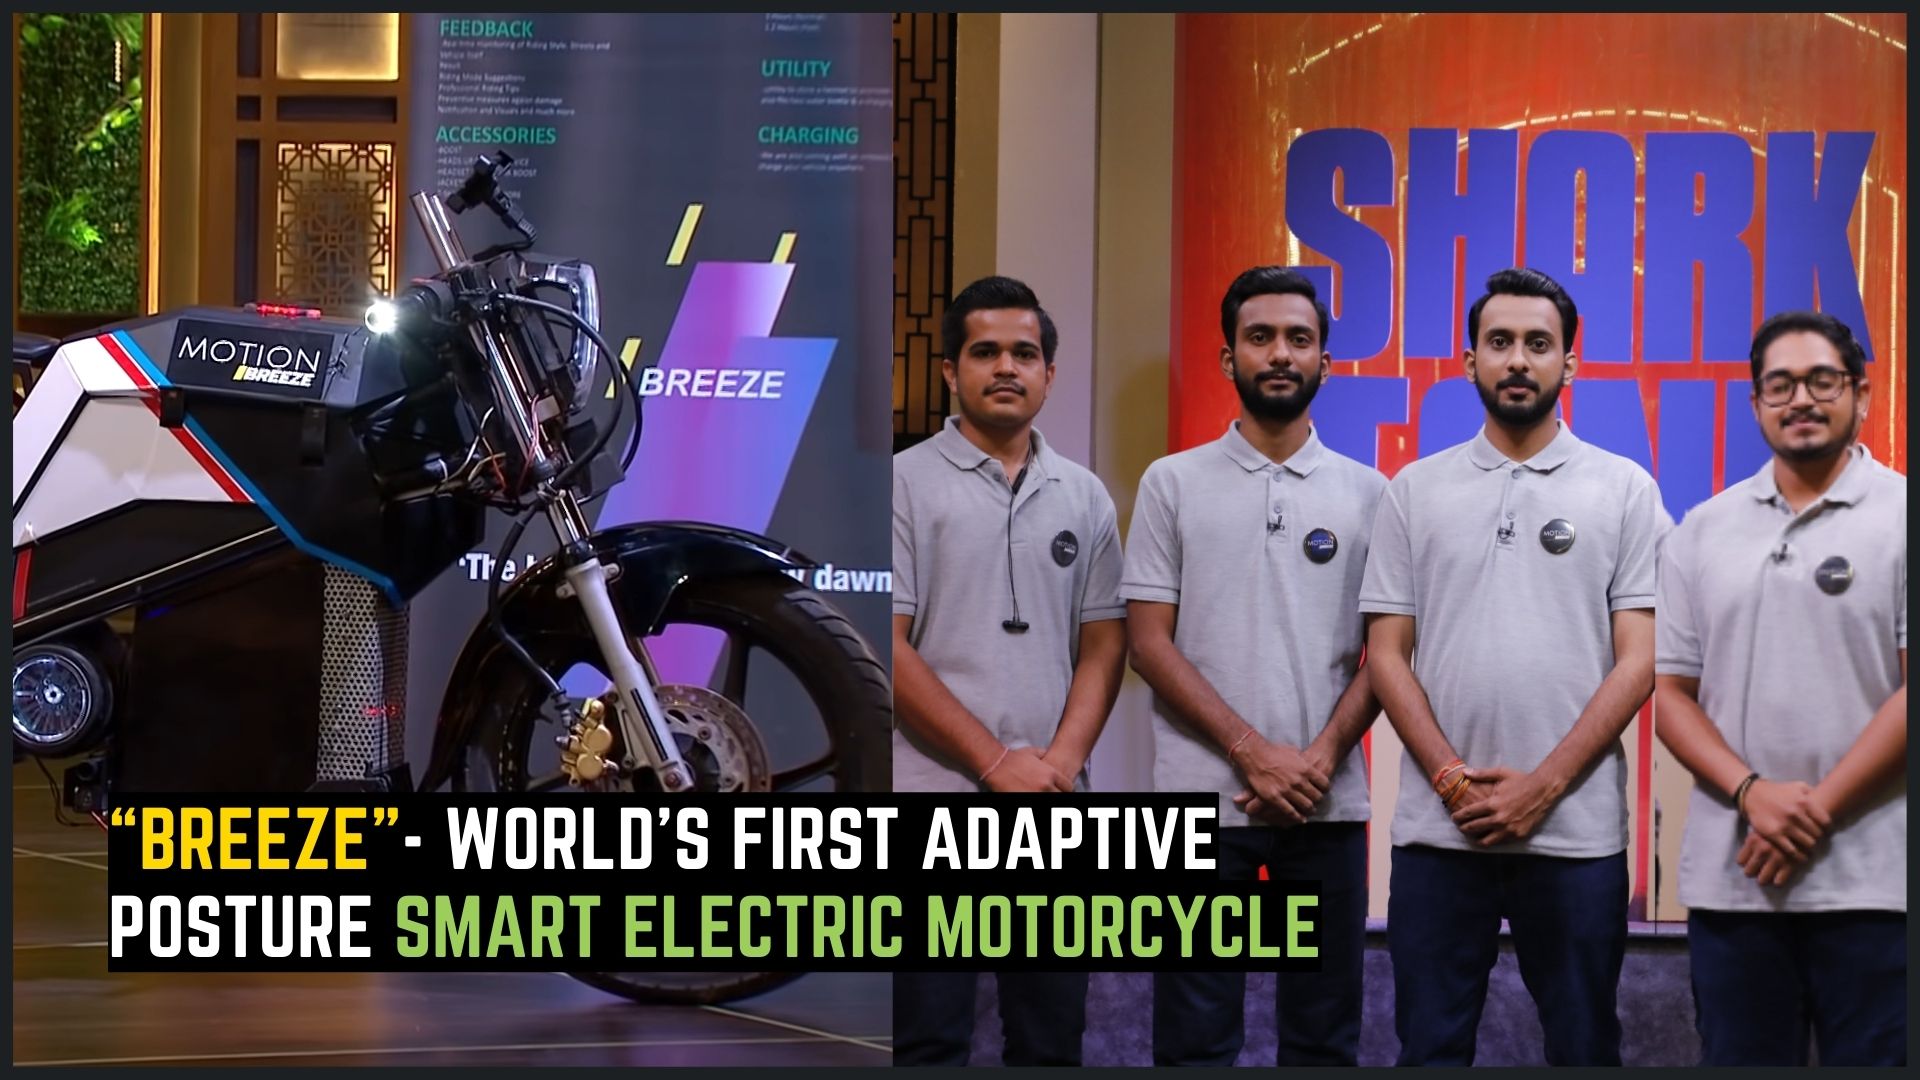 https://e-vehicleinfo.com/breeze-worlds-first-adaptive-posture-smart-electric-motorcycle/